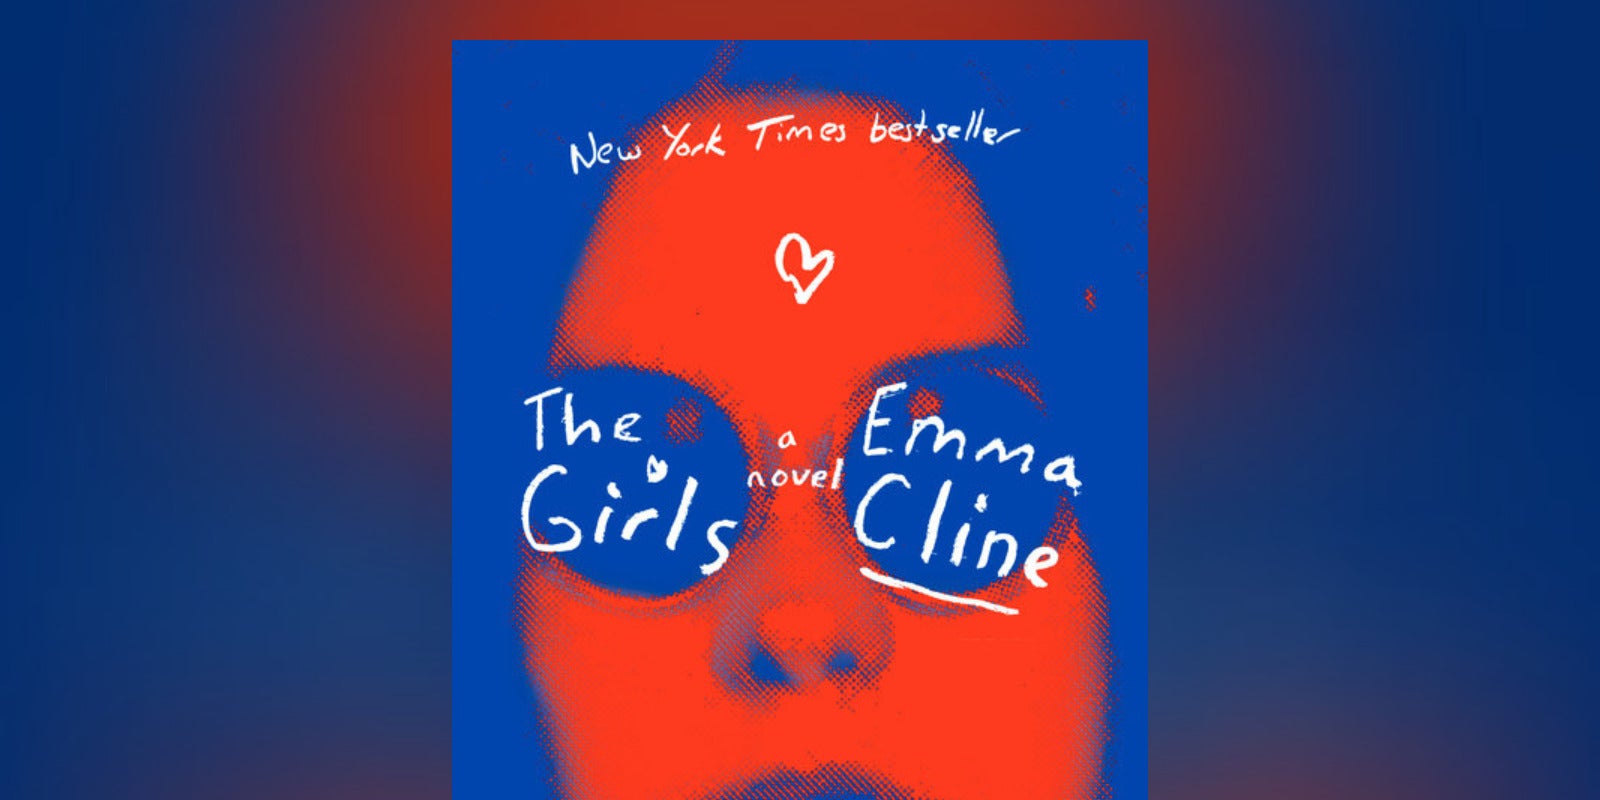 The New Yorker on The Girls by Emma Cline: Media Update